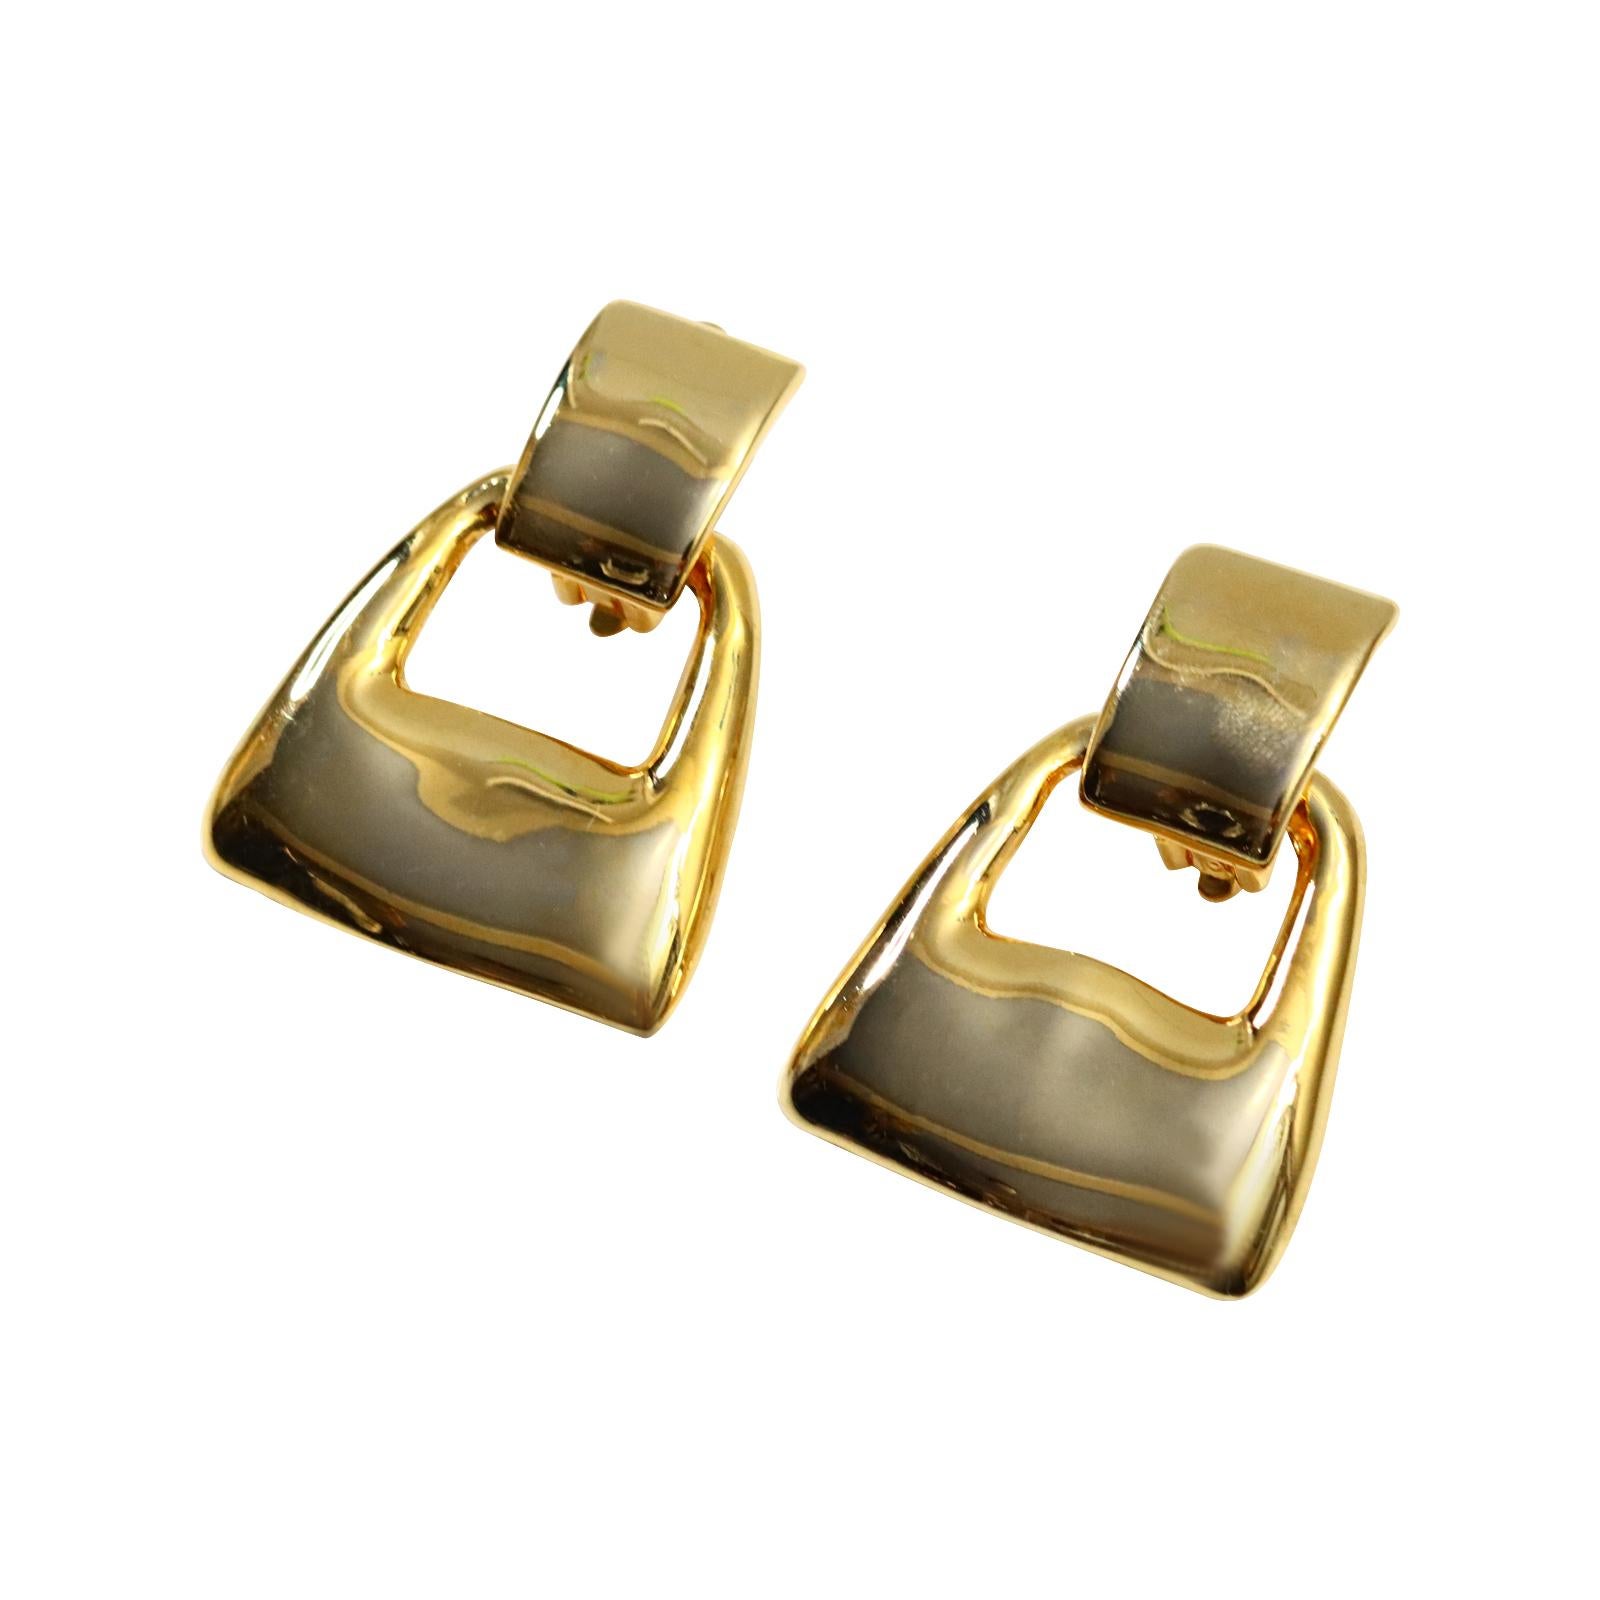 Modern Vintage Gold Tone Square Dangling Earrings Circa 1980s For Sale